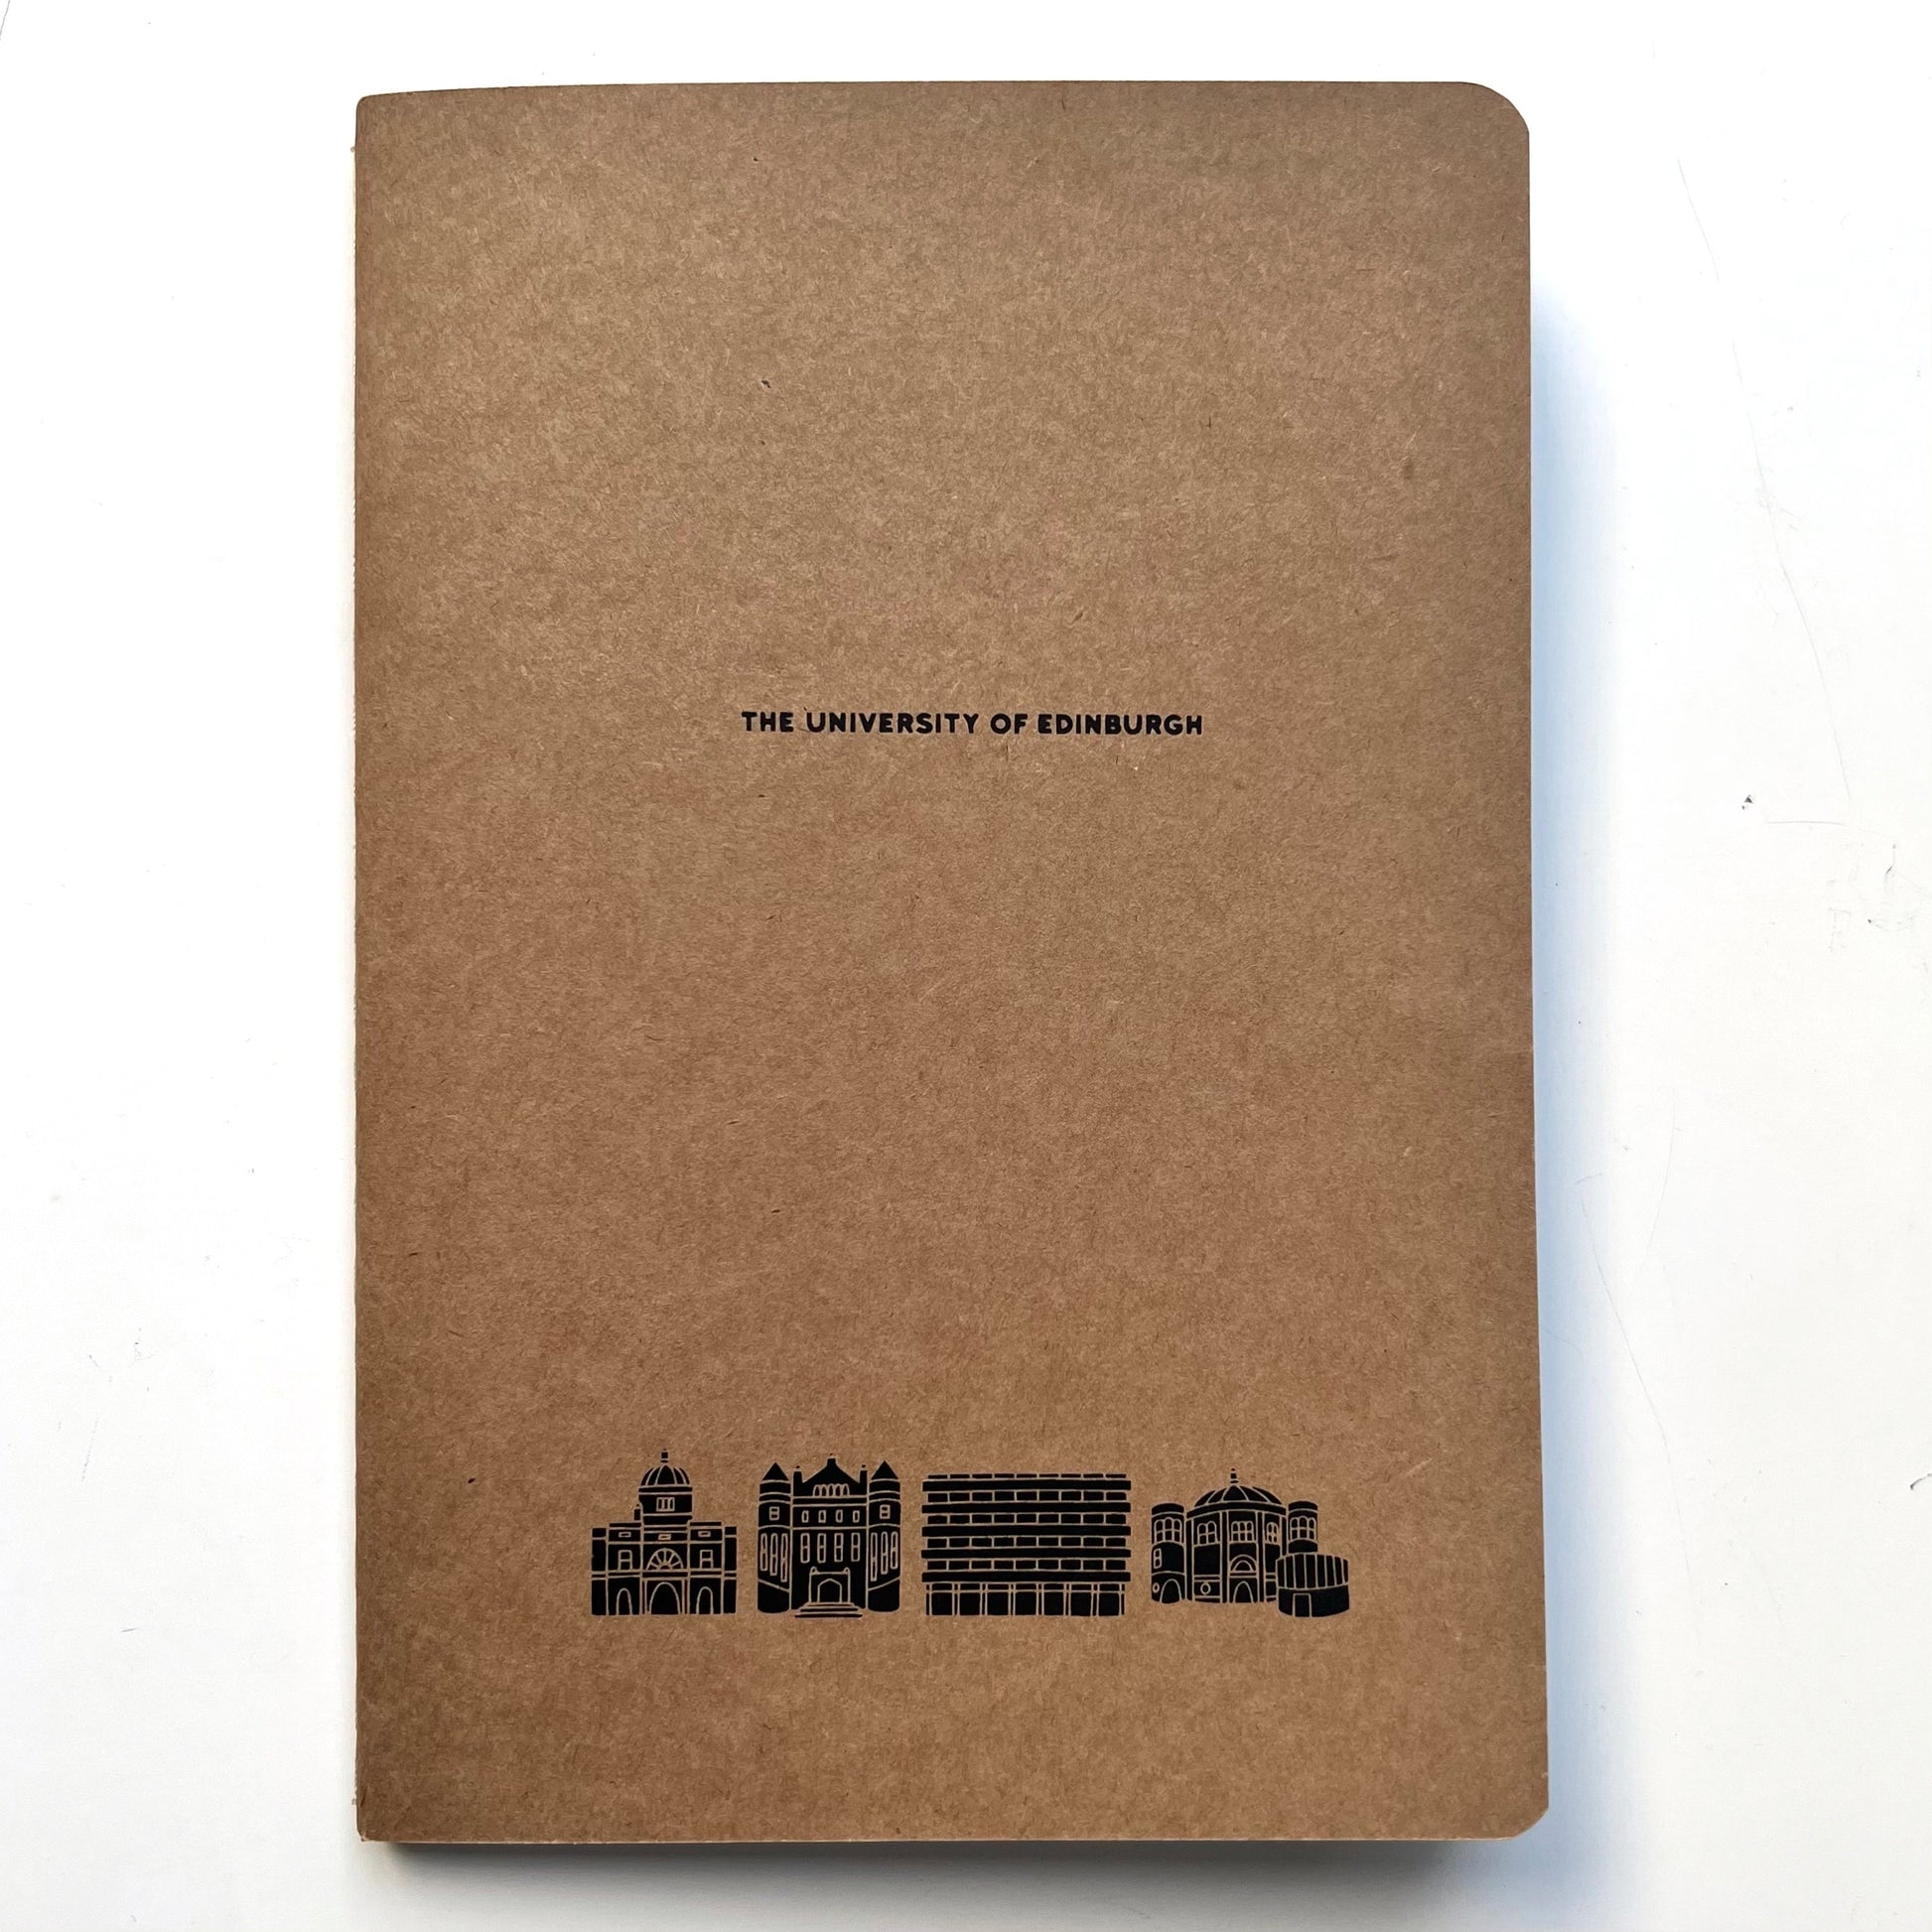 A5 kraft notebook with 'The University of Edinburgh' and University building illustrations of the cover in black print.